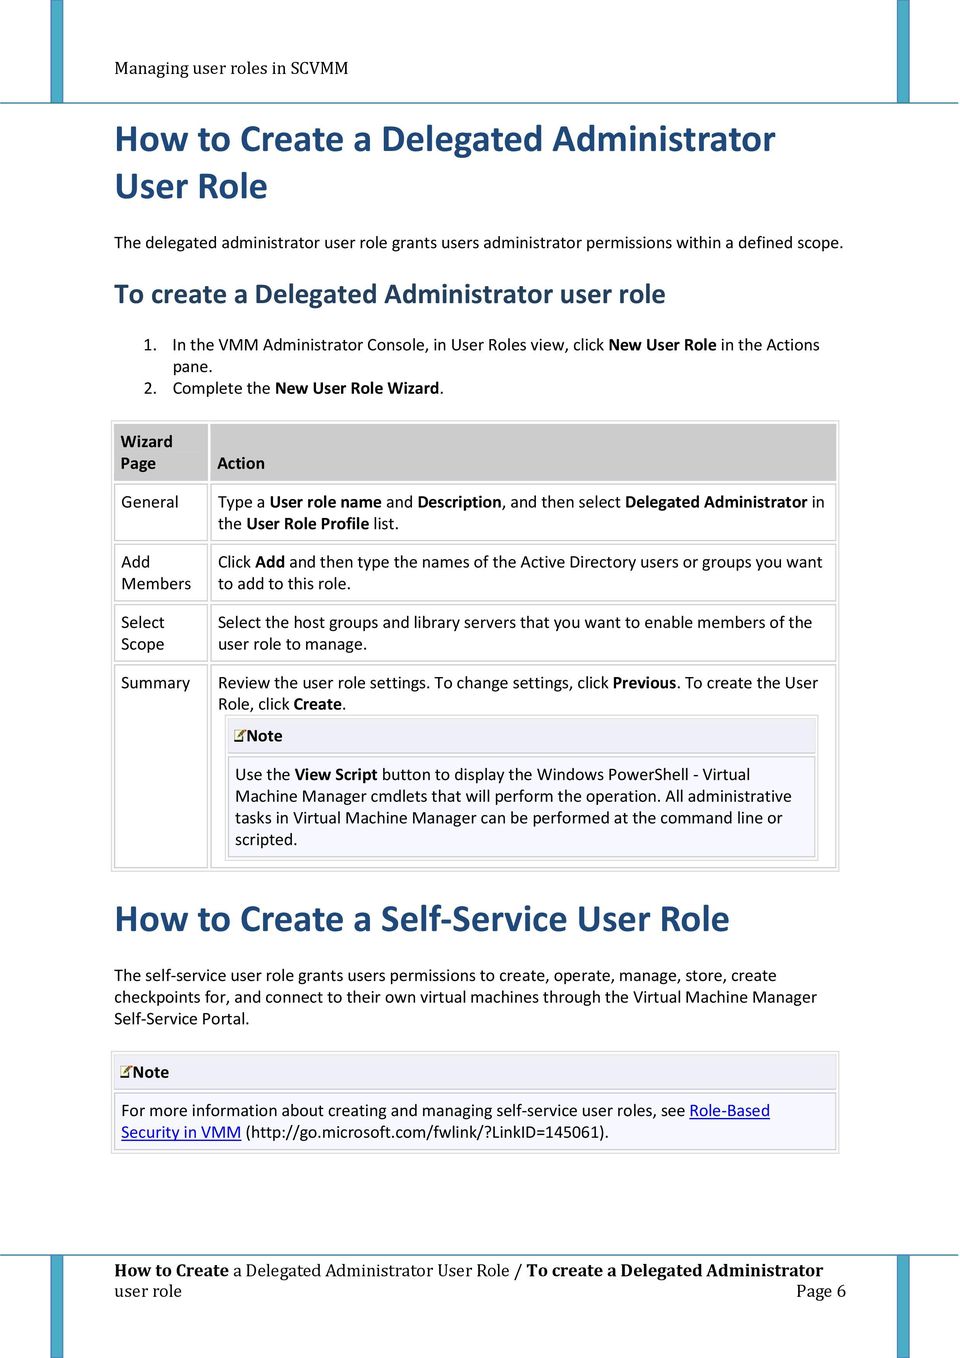 Wizard Page General Add Members Select Scope Action Type a User role name and Description, and then select Delegated Administrator in the User Role Profile list.